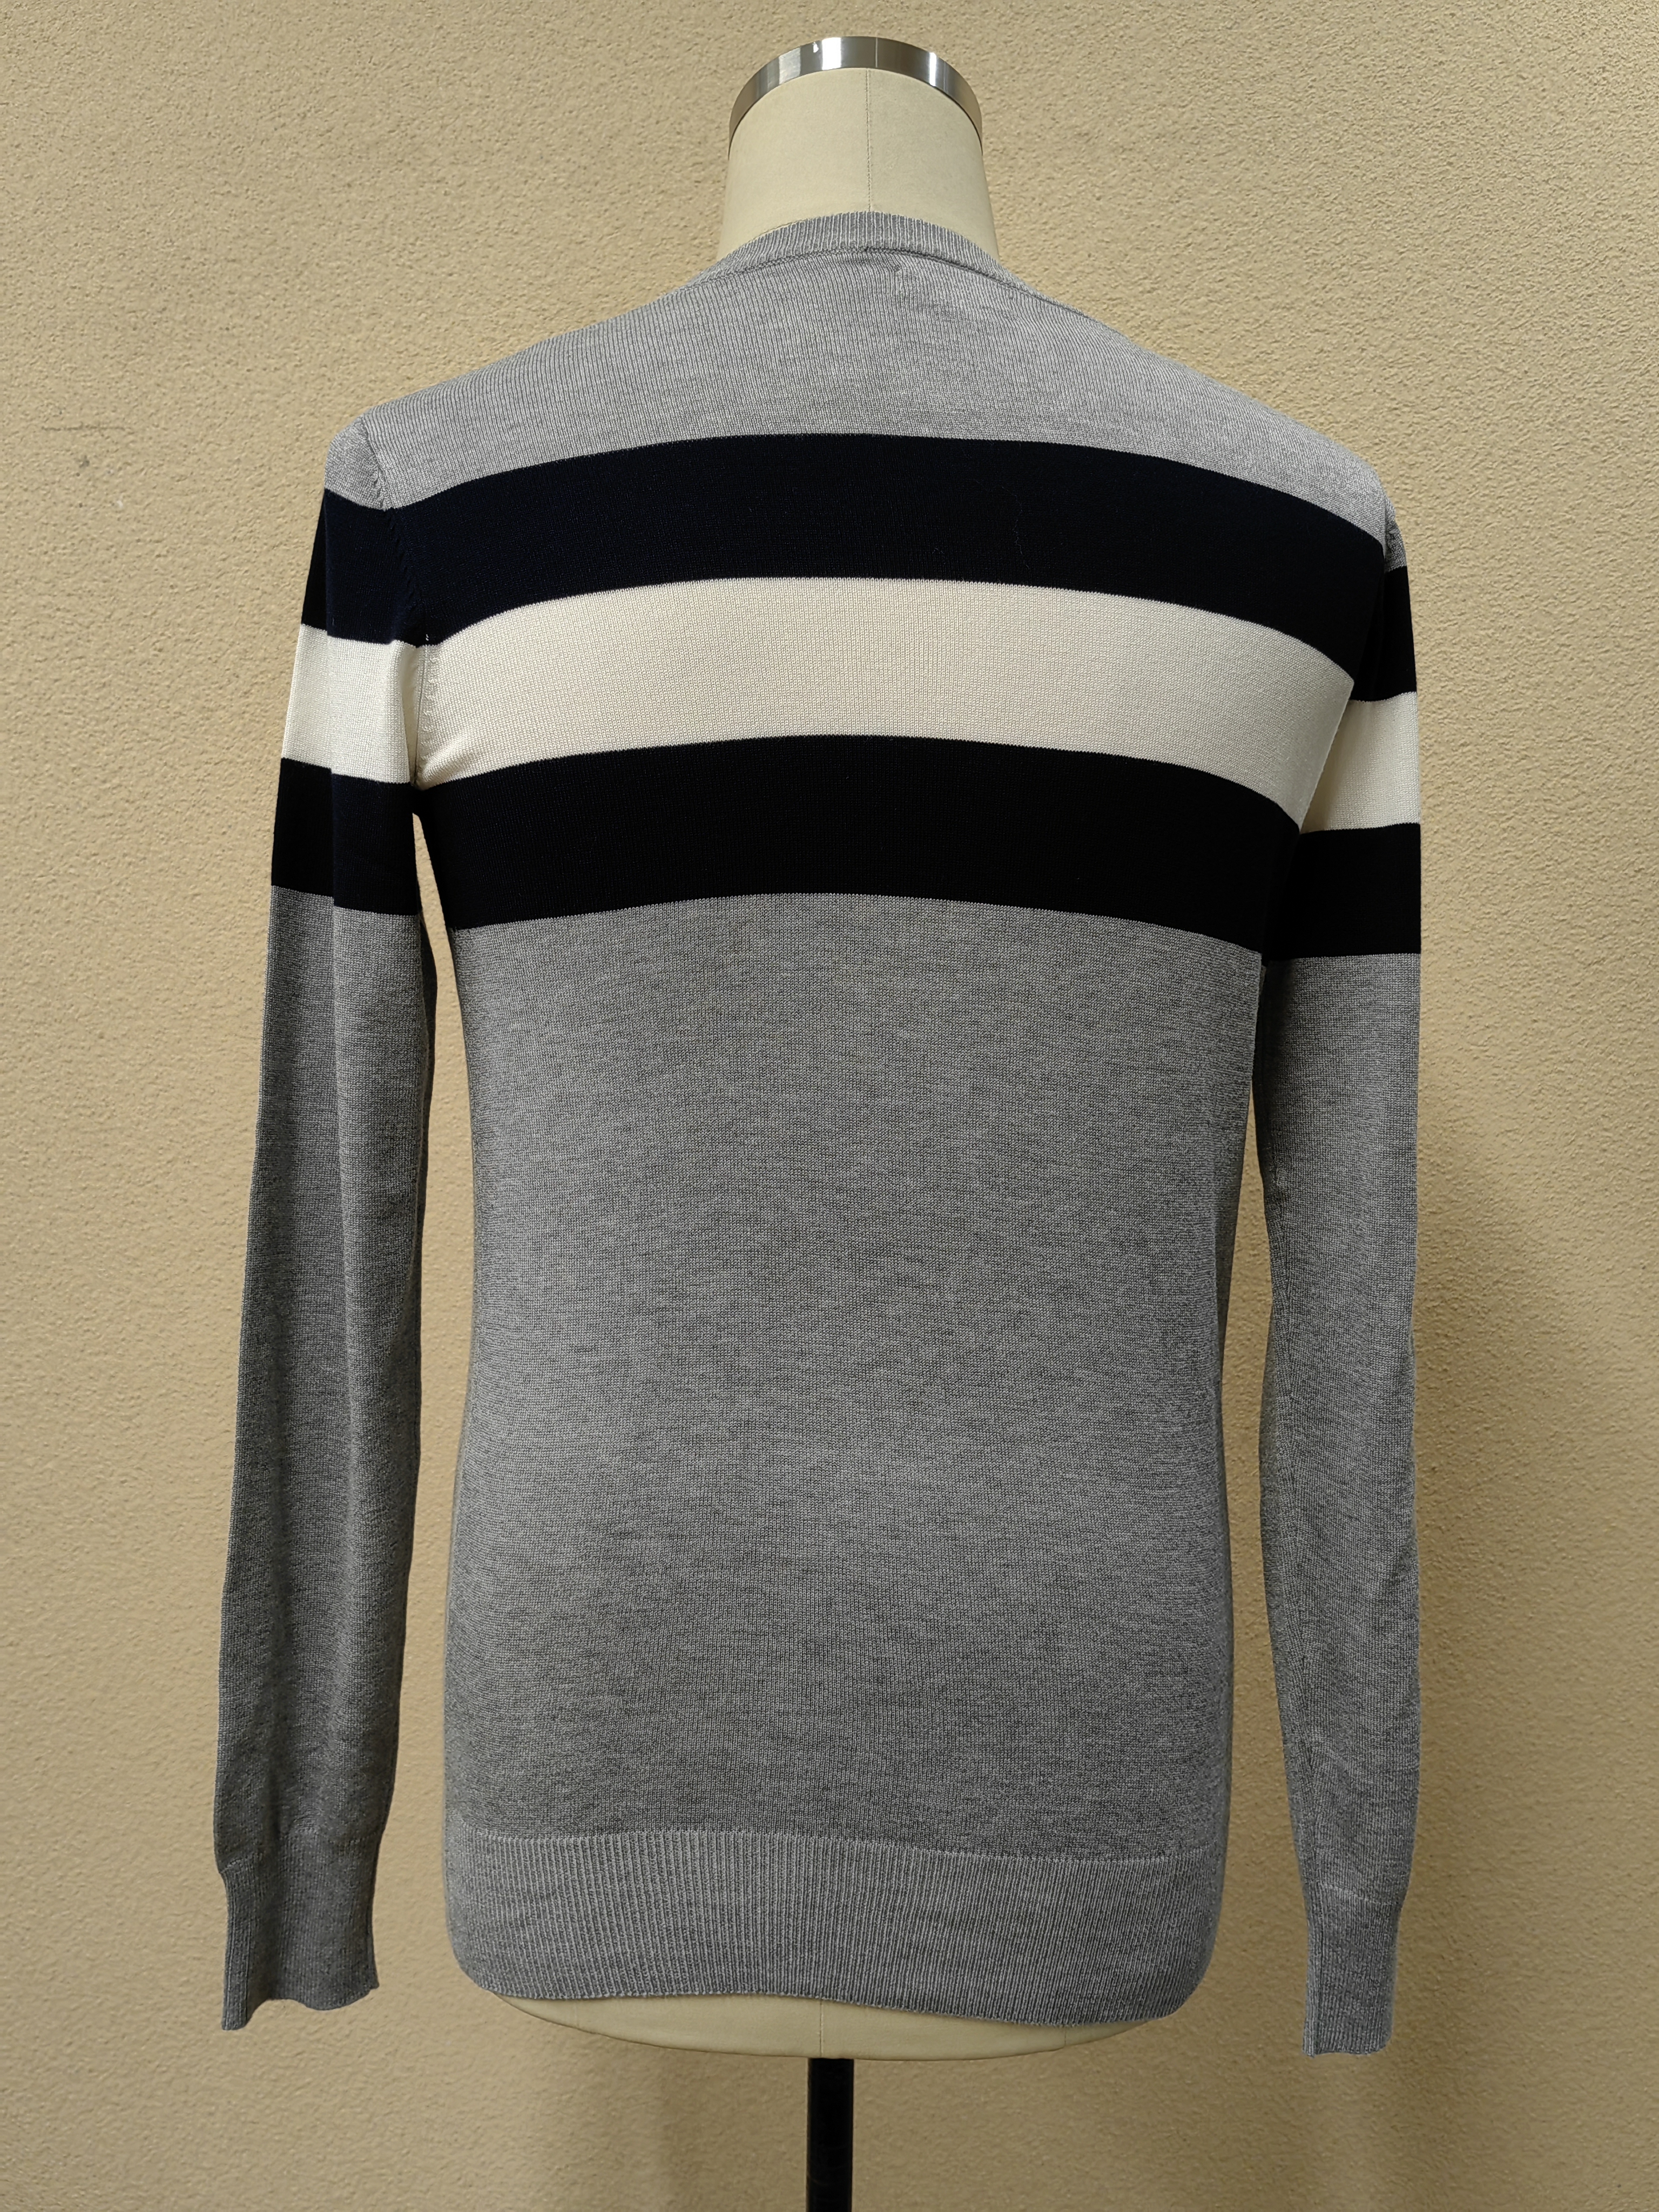 2022 New Design Grey Knitted Long Sleeve Men's Crewneck Striped Colorblock Sweater 